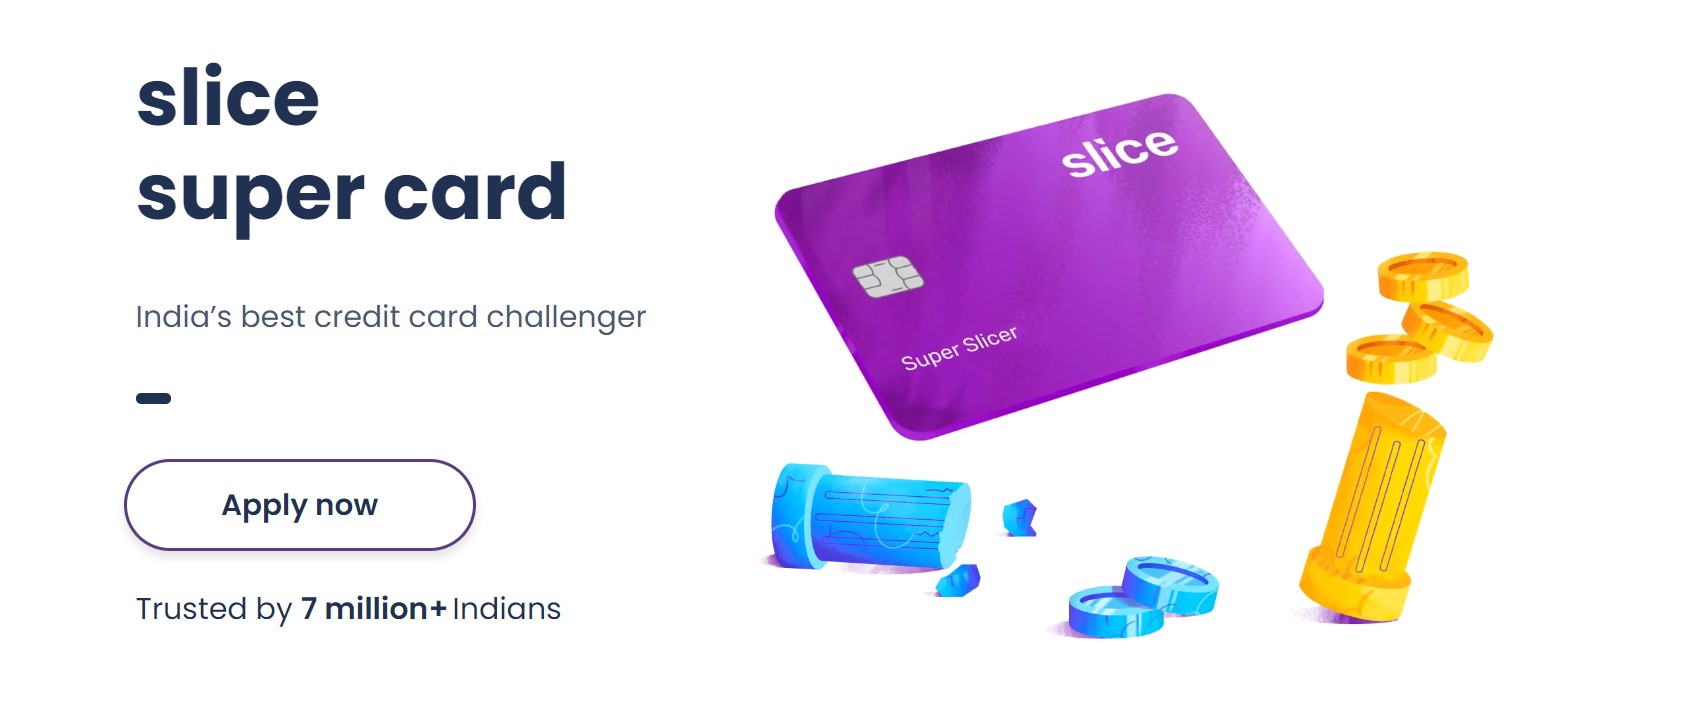 How to apply for a Slice Super Card in India